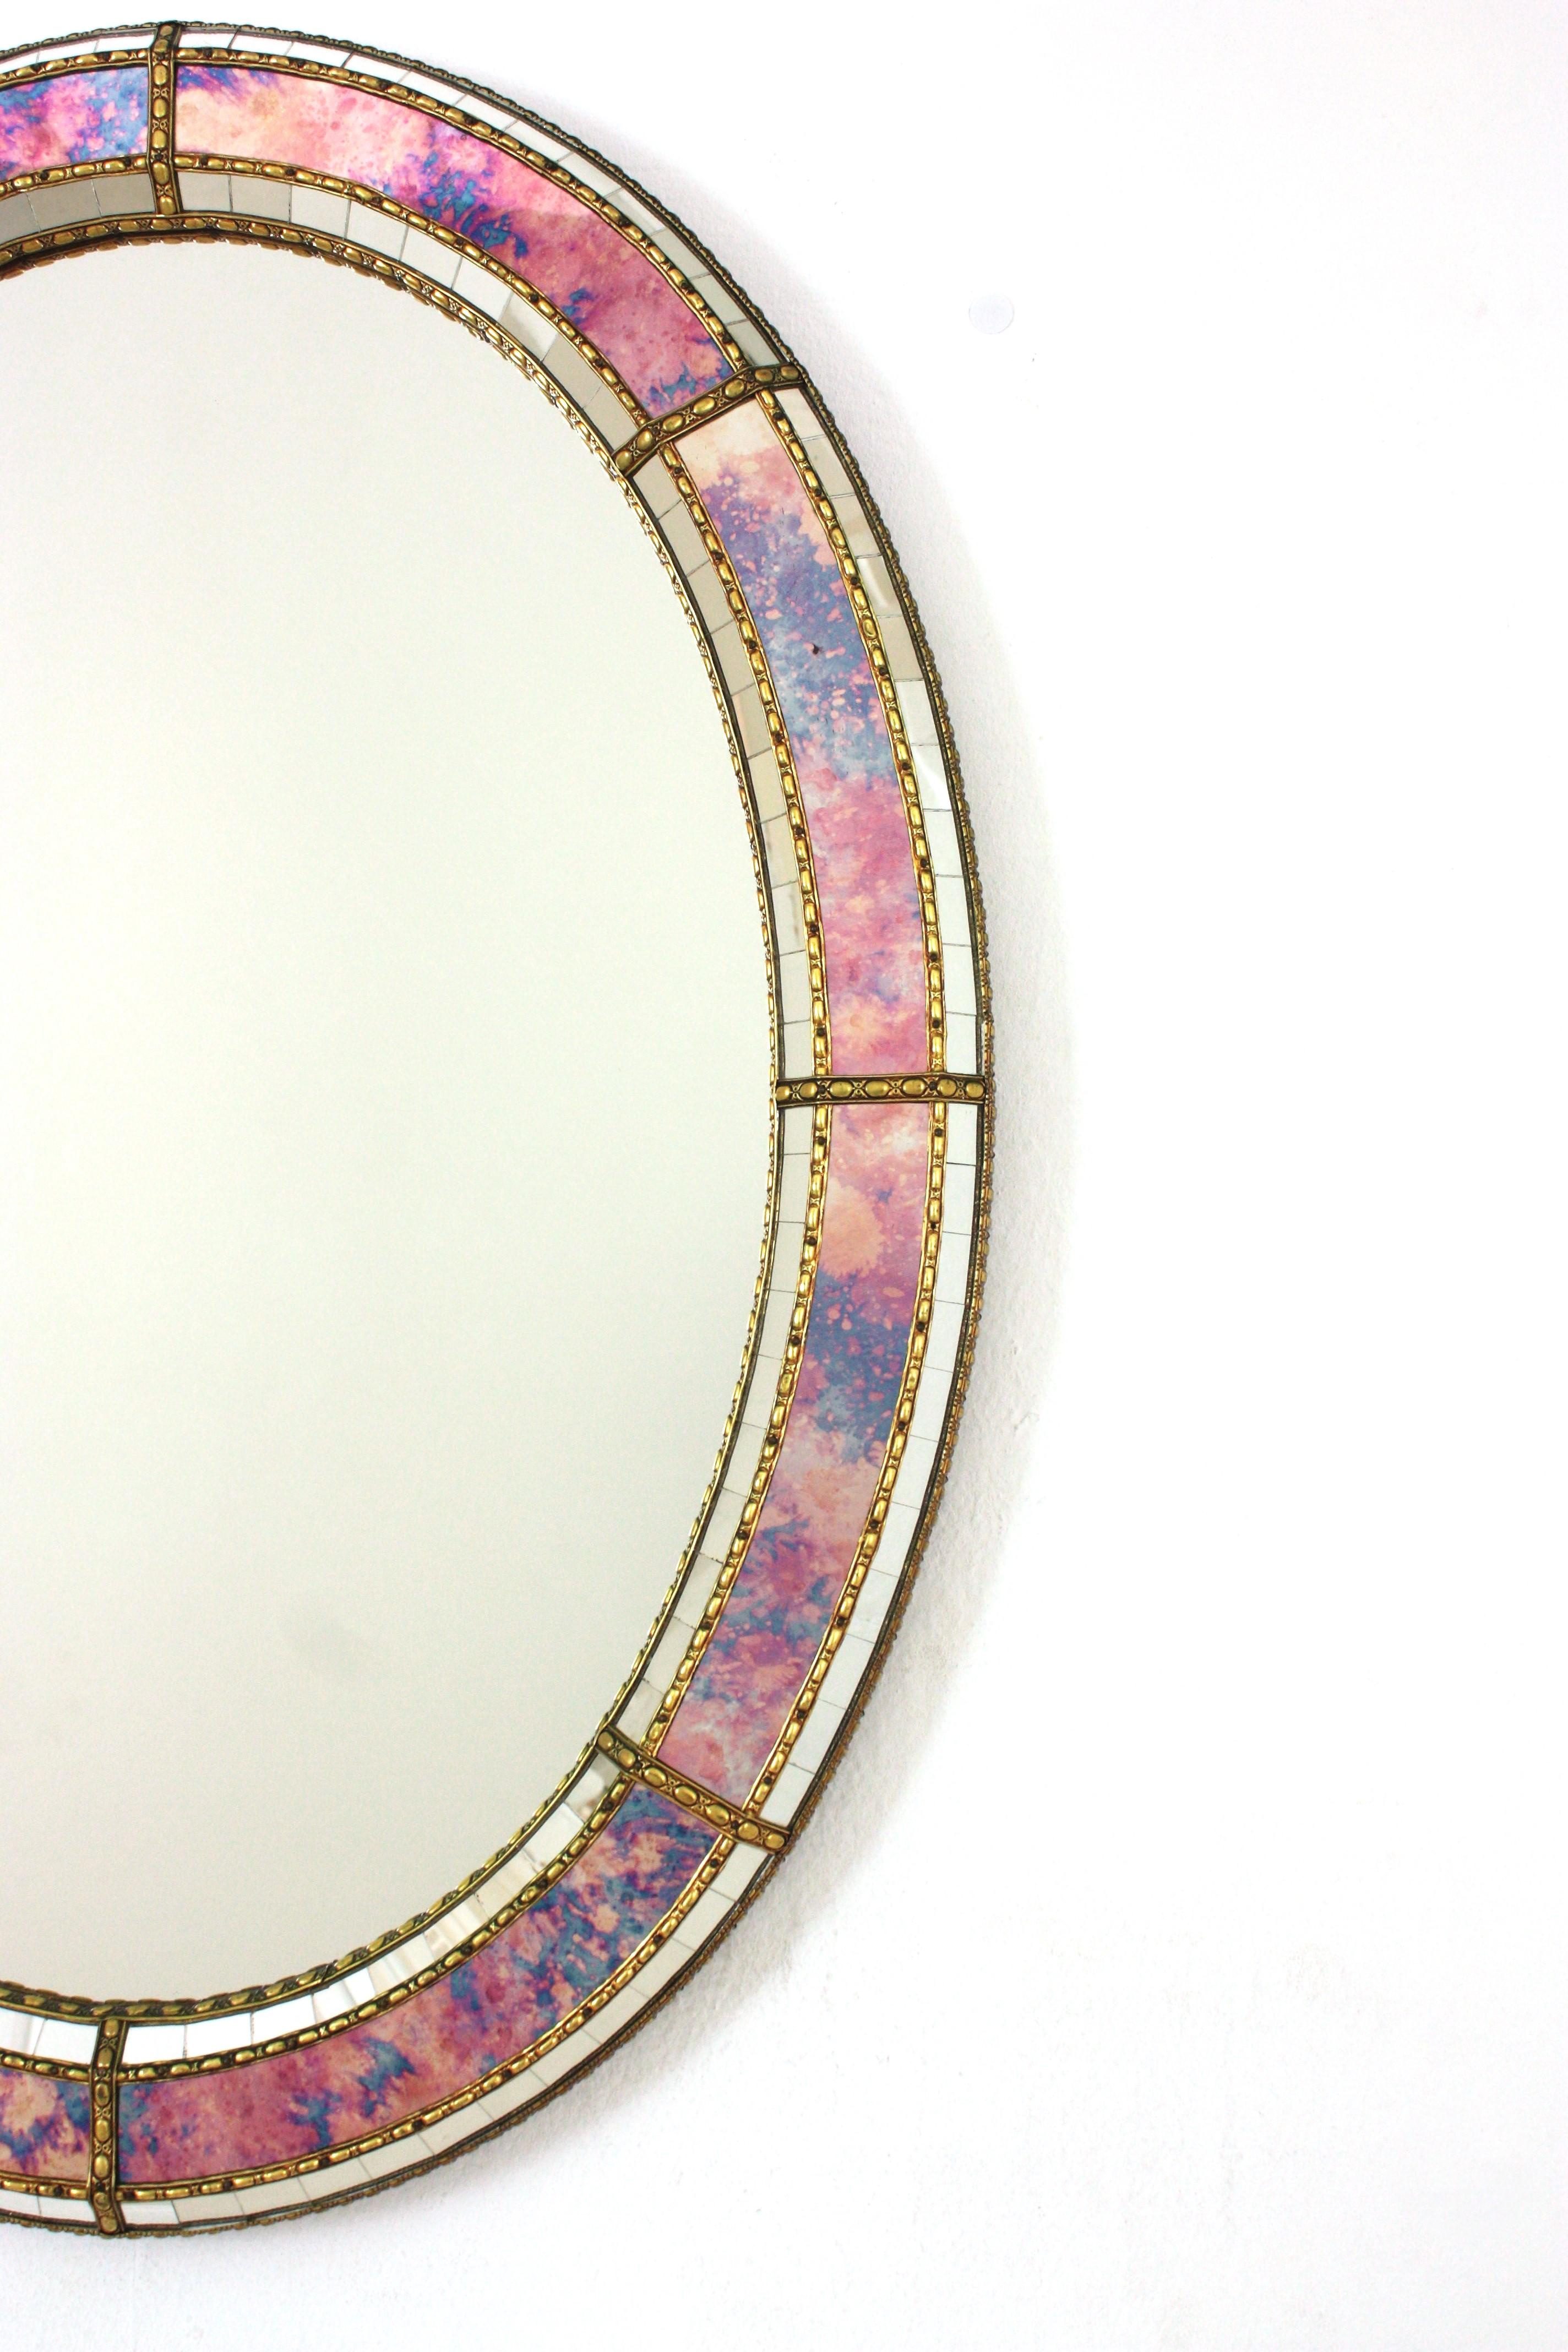 20th Century Oval Venetian Style Mirror with Pink Purple Glass and Brass Details